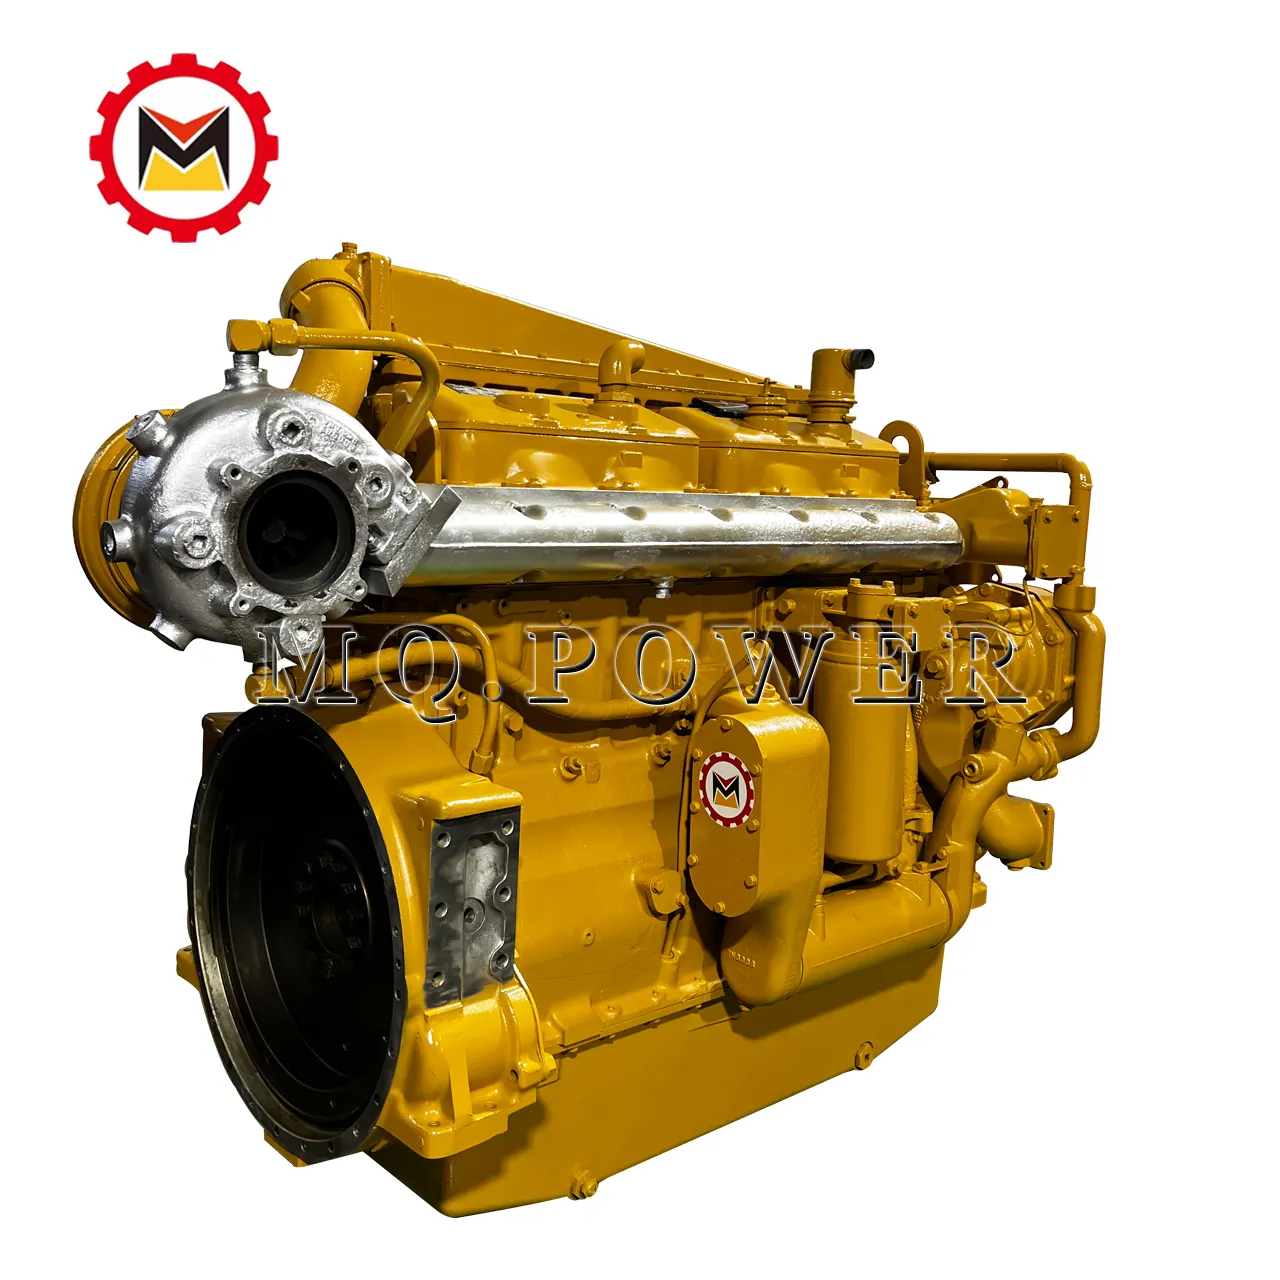 Marine engine imported 3406B 3406C 3406E diesel fuel ready to ship remanufactured engines